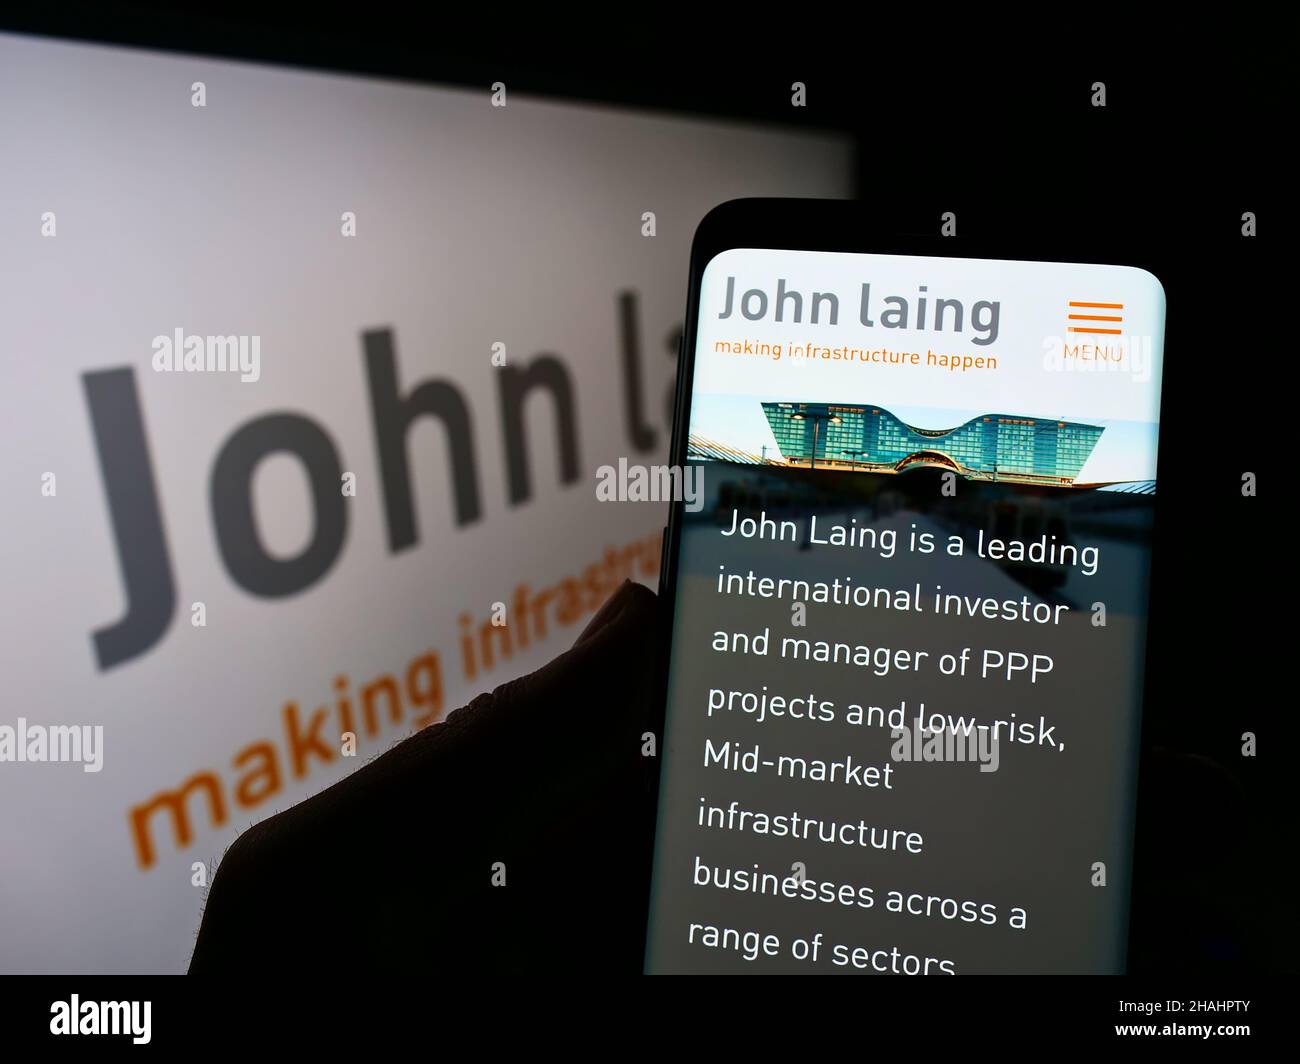 Person holding cellphone with website of British company John Laing Group Limited on screen in front of logo. Focus on center of phone display. Stock Photo